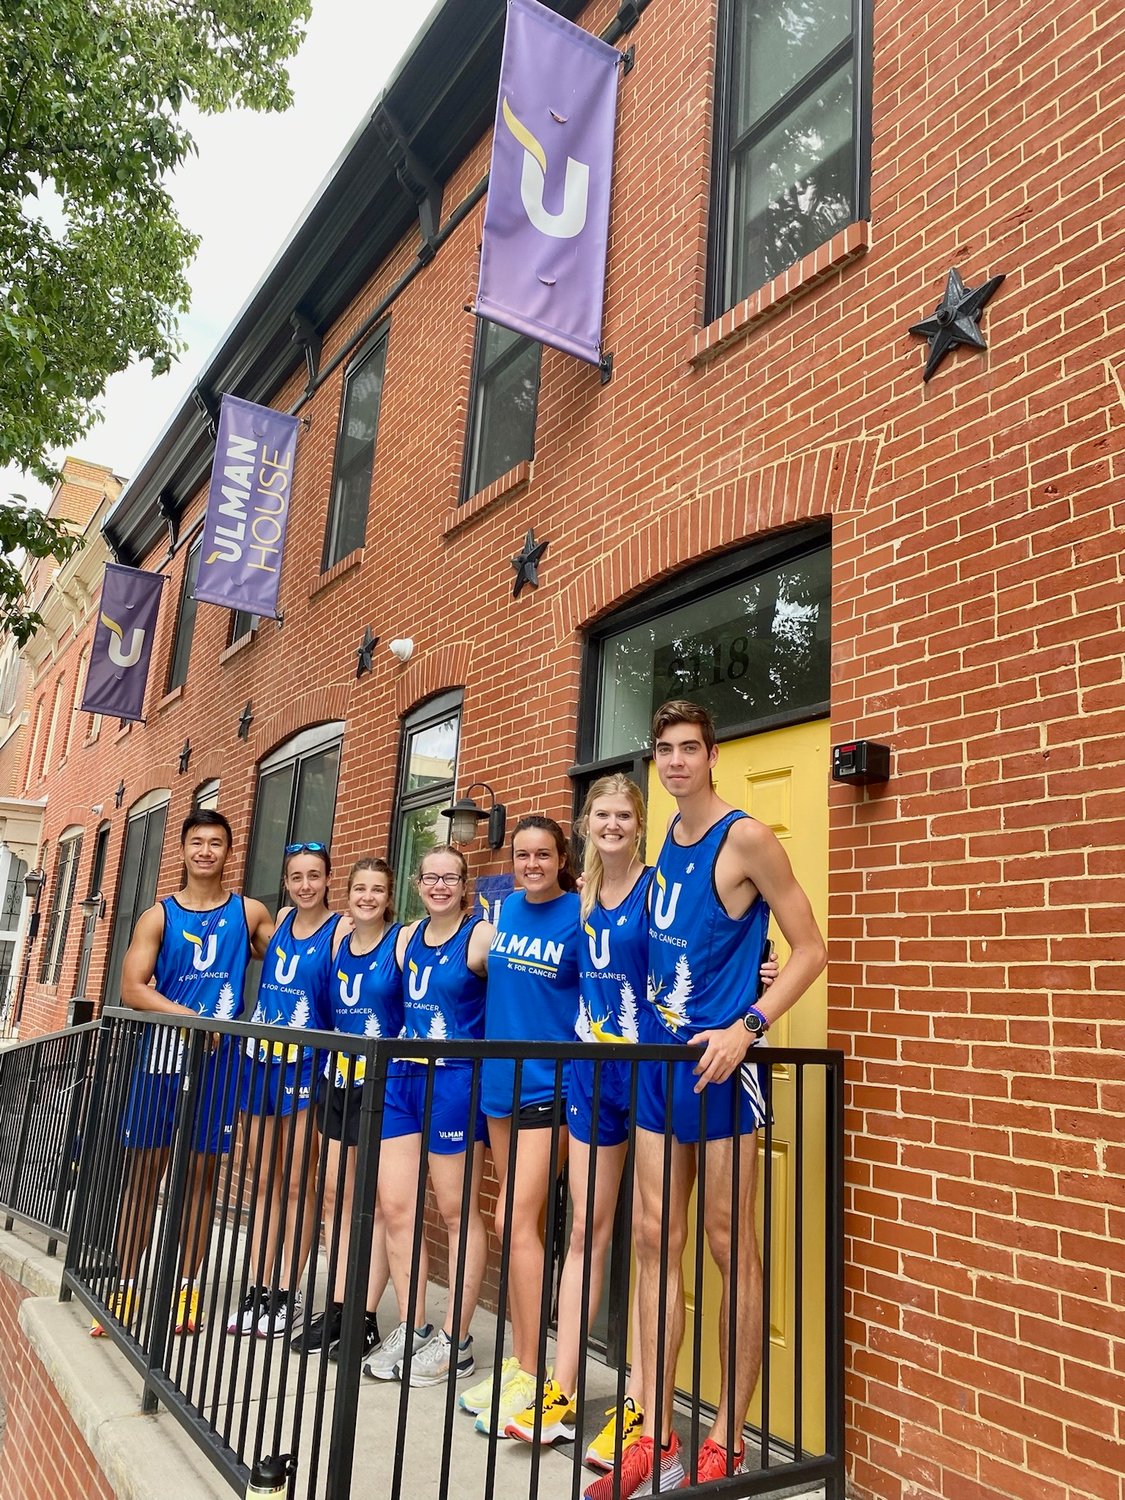 Greta Ohanian, Mary Nahlen, Cassidy Dunn, Jane Sundell, Sydney Beason and Max Worley, of Team Zion, in front of the Ulman Foundation’s headquarters.